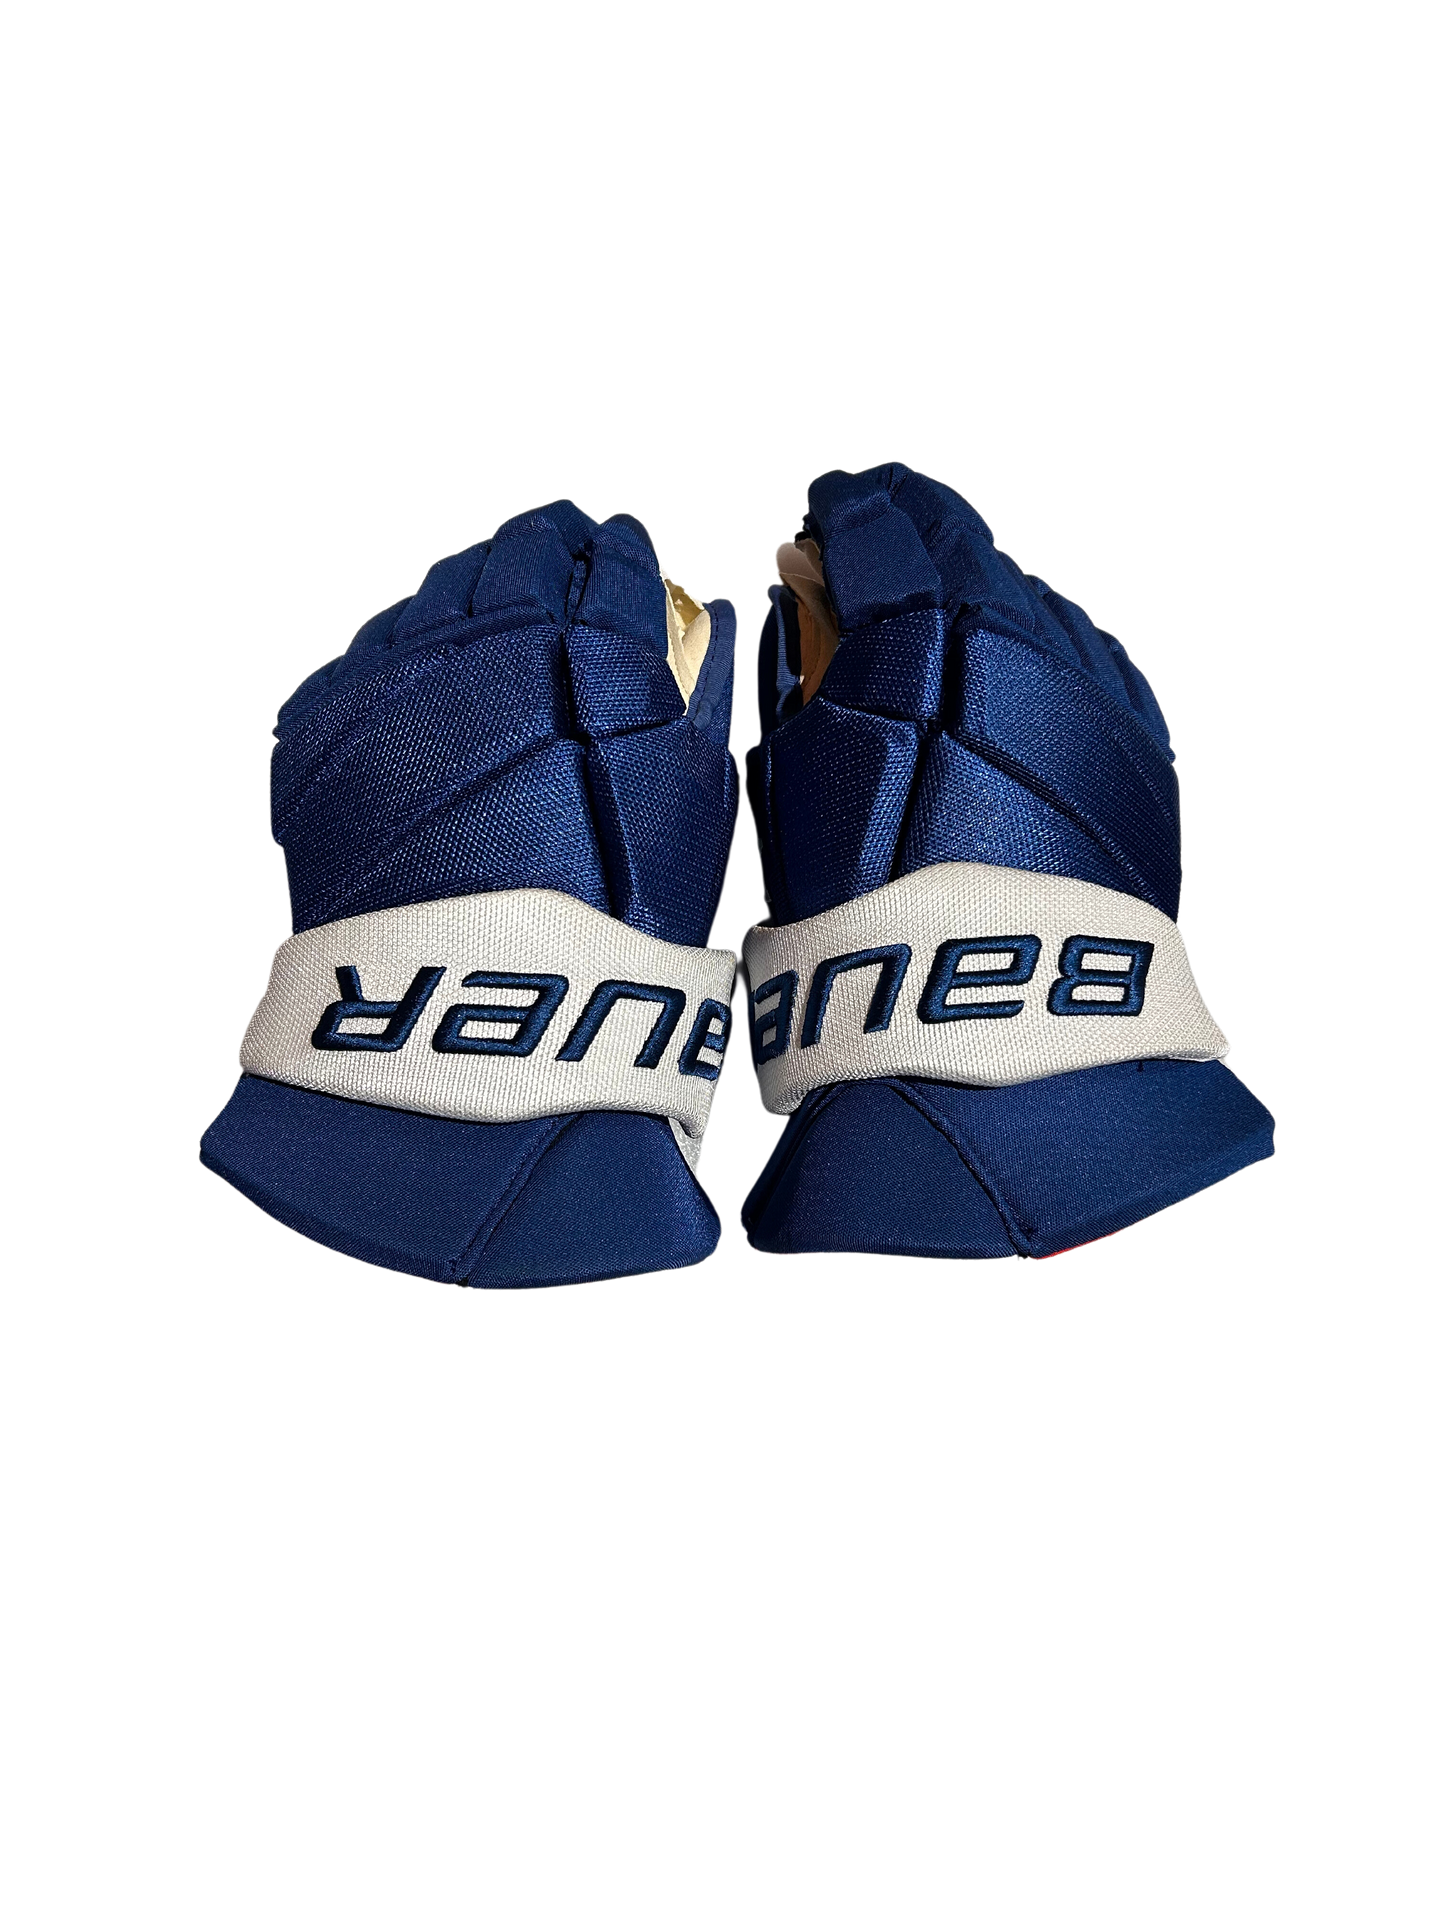 New Team Issued Blue Colorado Avalanche 15" Bauer Vapor X Gloves (Extended Cuff)